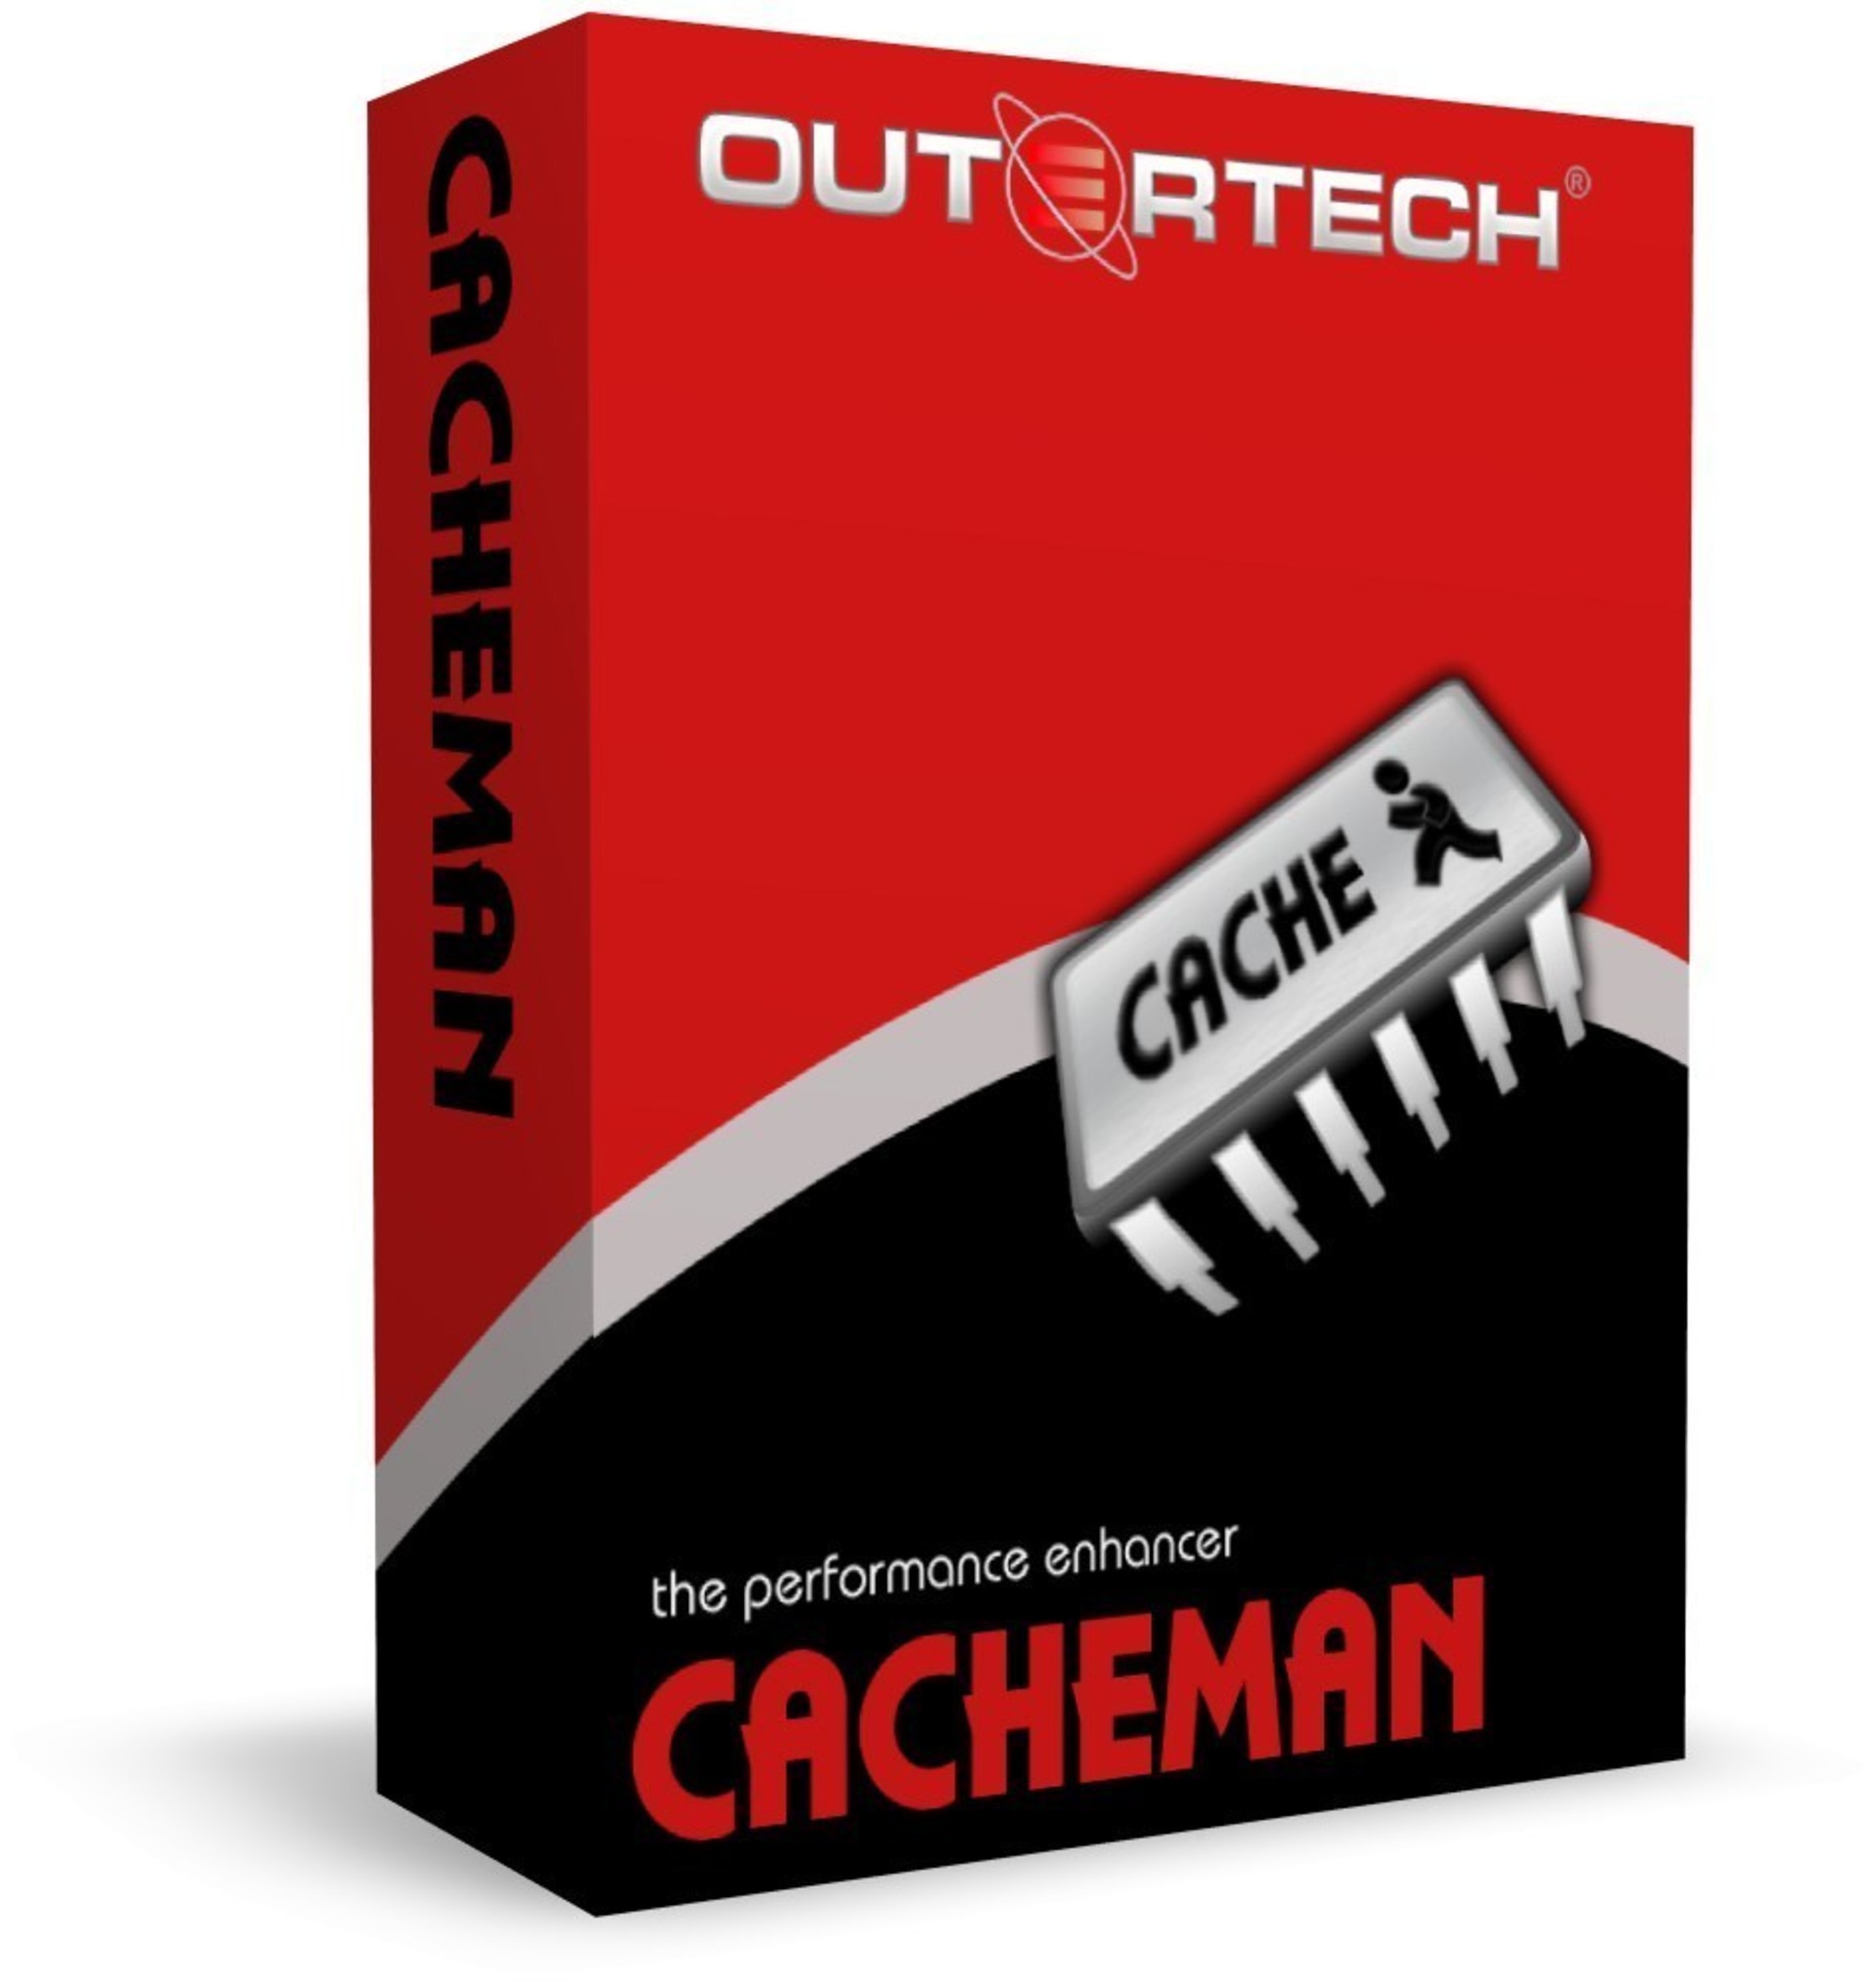 Outertech Releases Cacheman 10, Windows Optimizer that Improves Responsiveness, Privacy, and Security of a PC